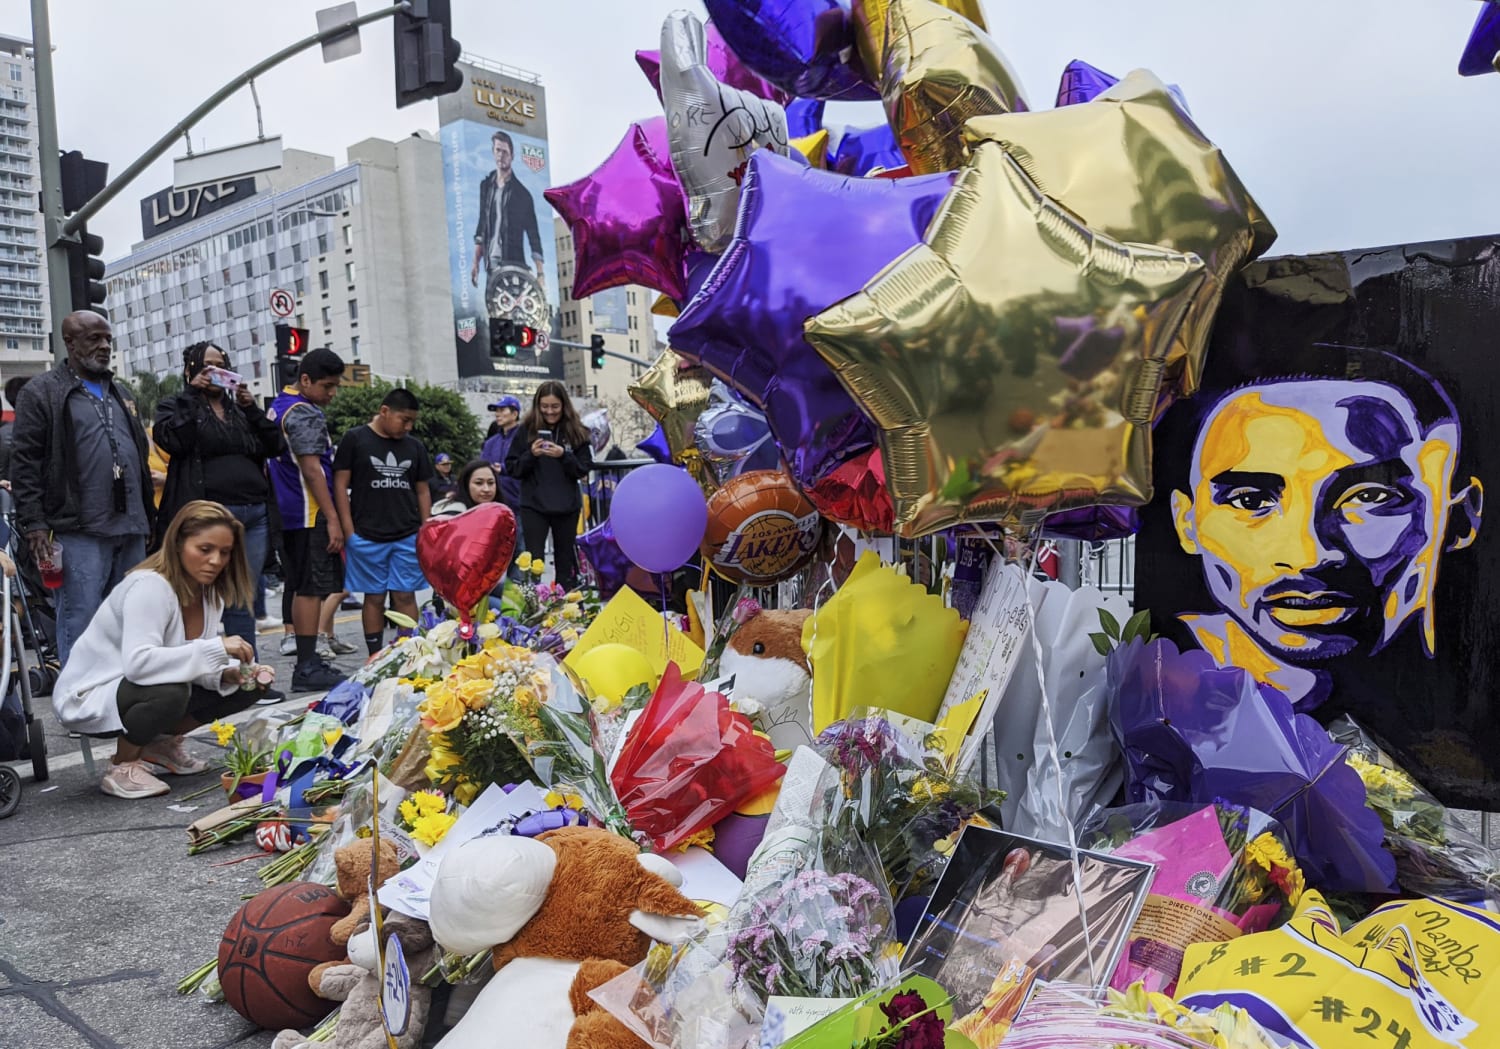 Kobe, daughter celebrated on 2/24 in honor of jersey numbers